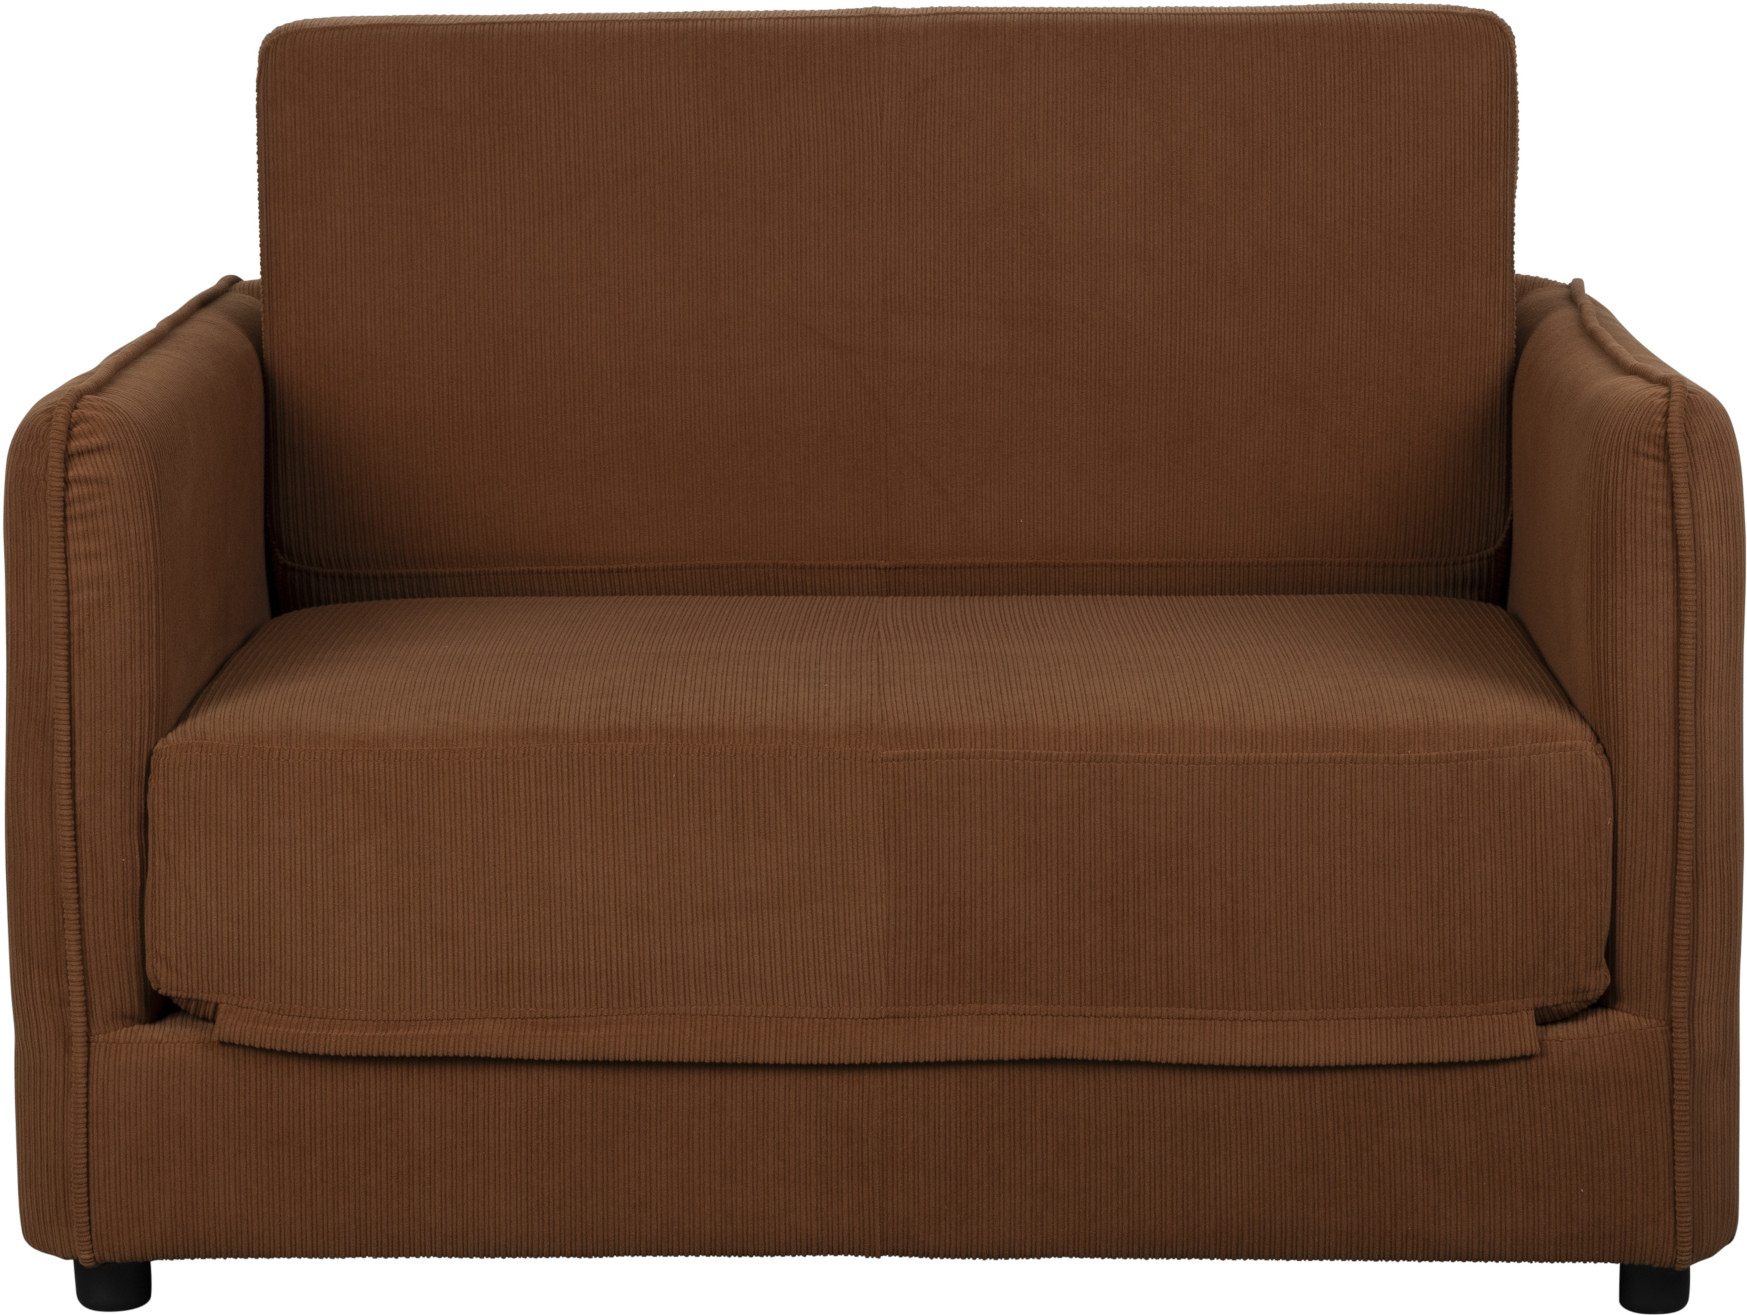 Loveseat Bankbed Jopie Brown White Label Living Fauteuil ZVR3100218